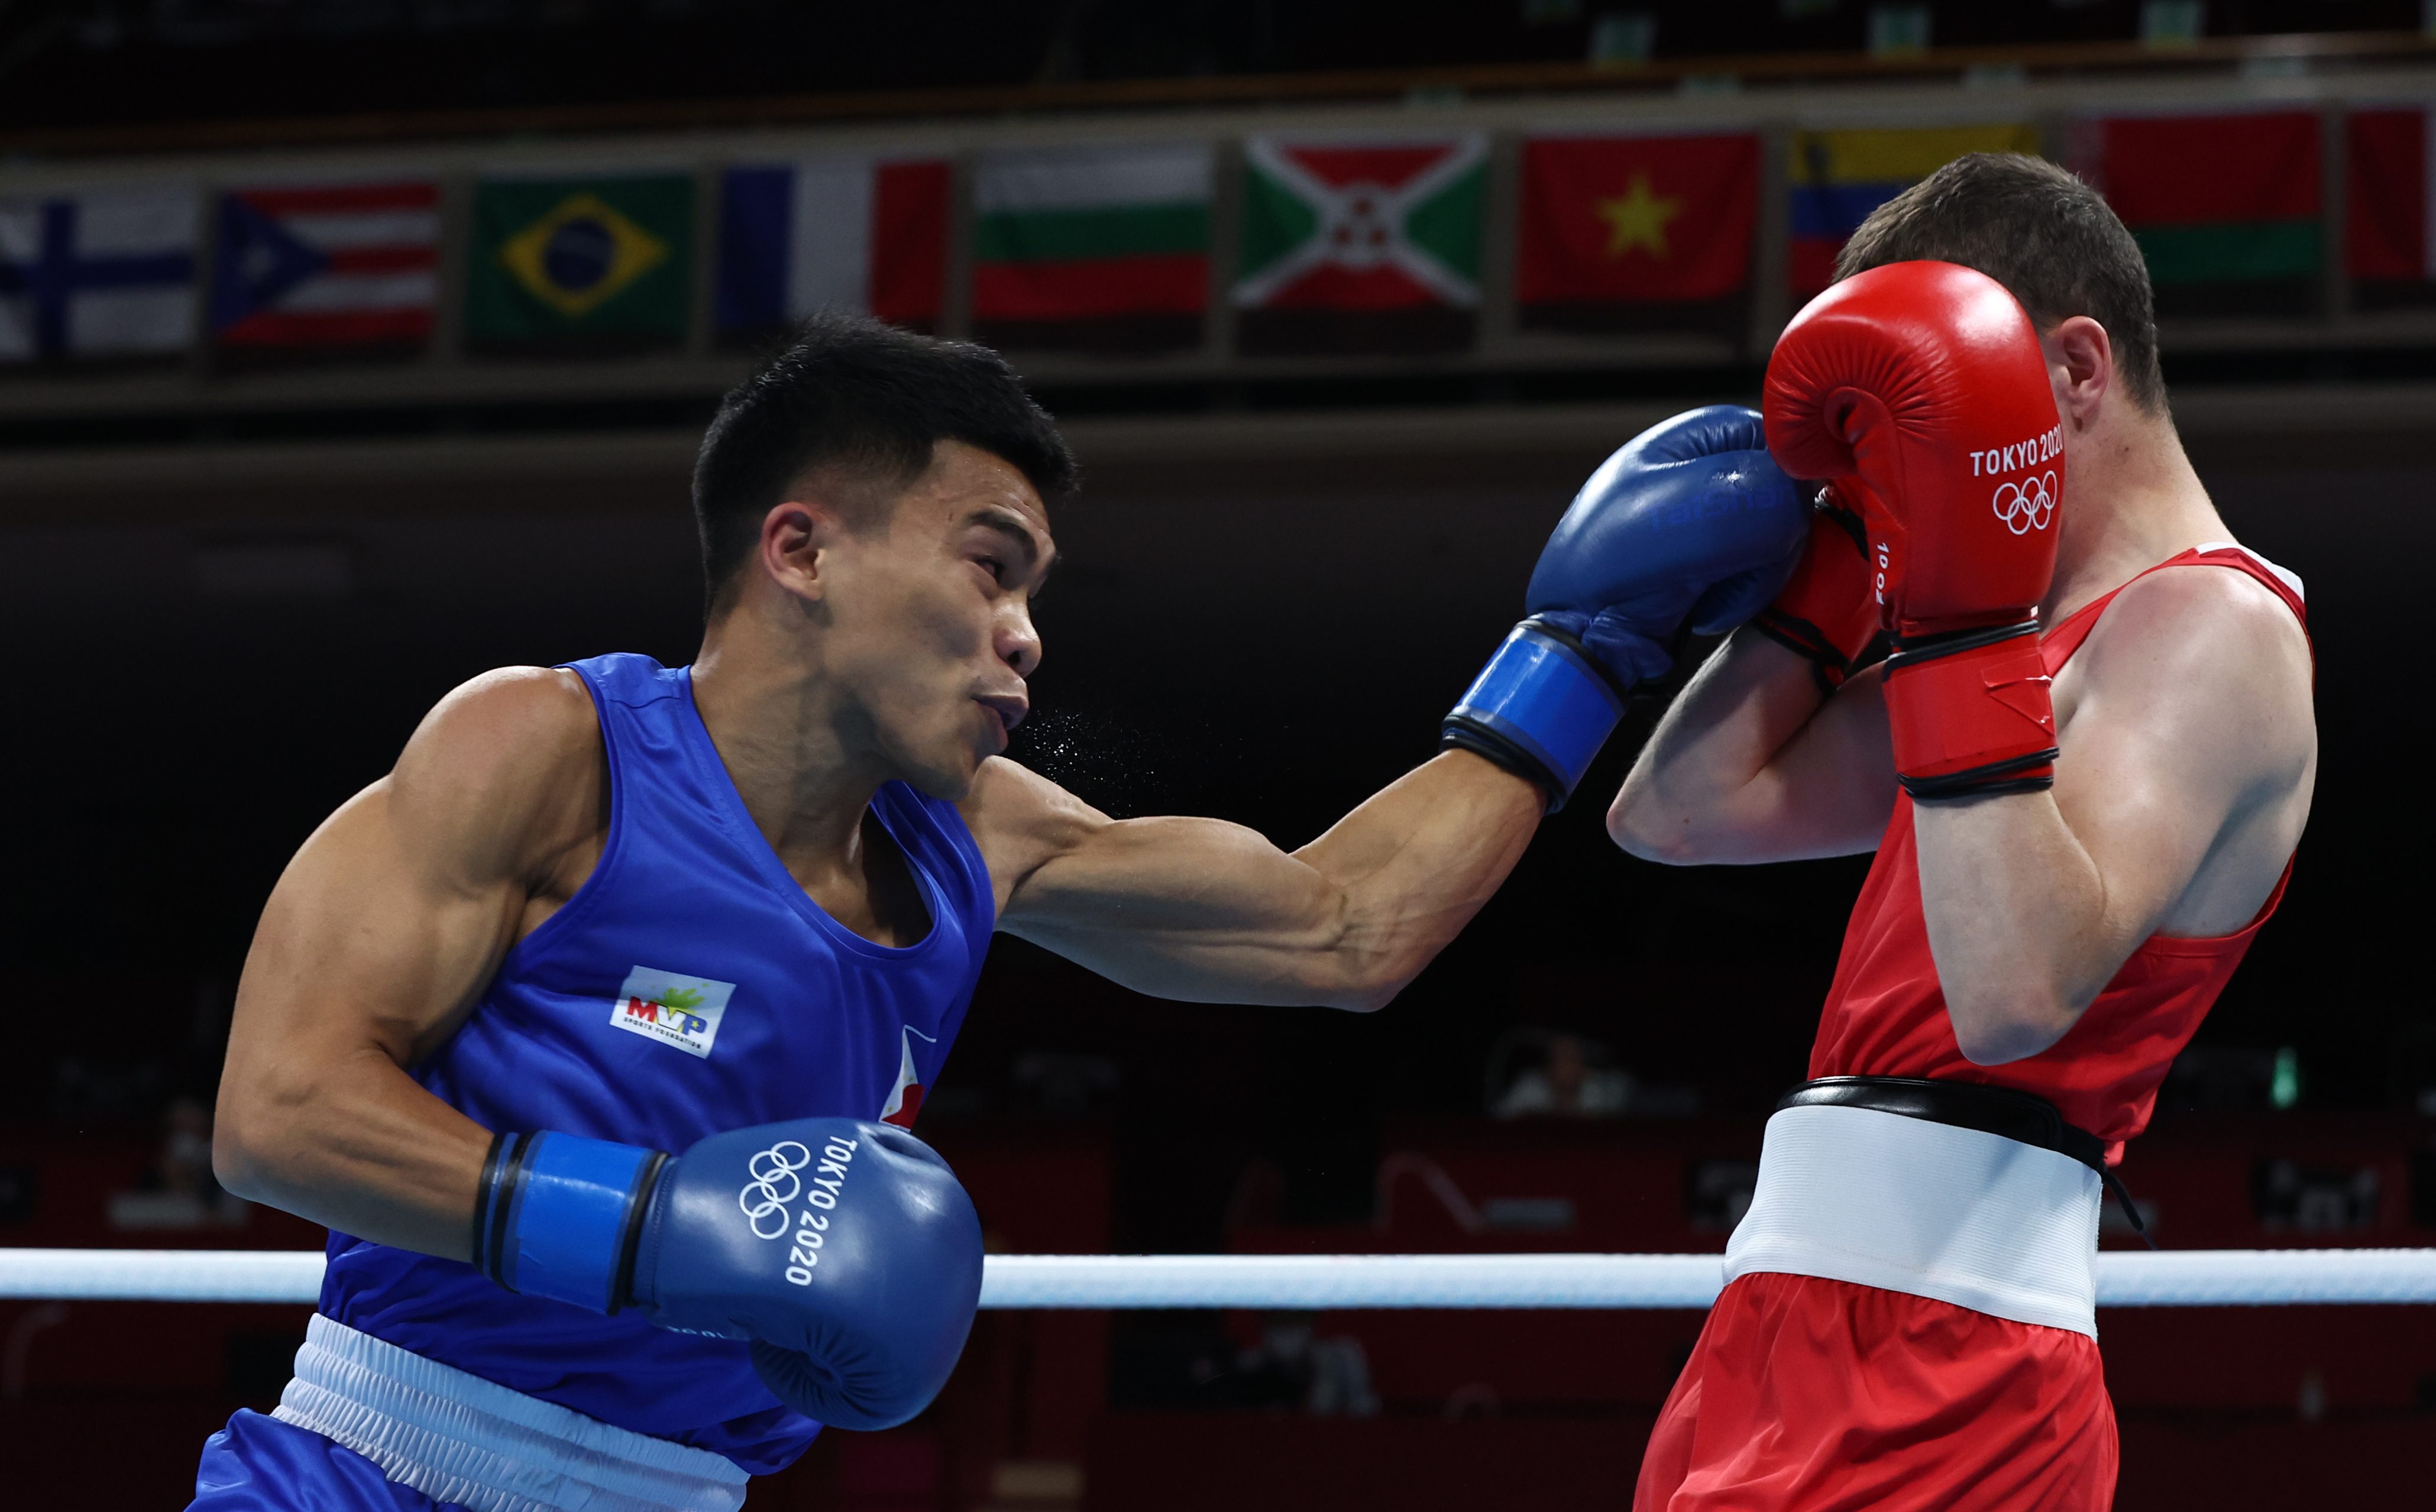 Carlo Paalam and his one shot at Olympic glory